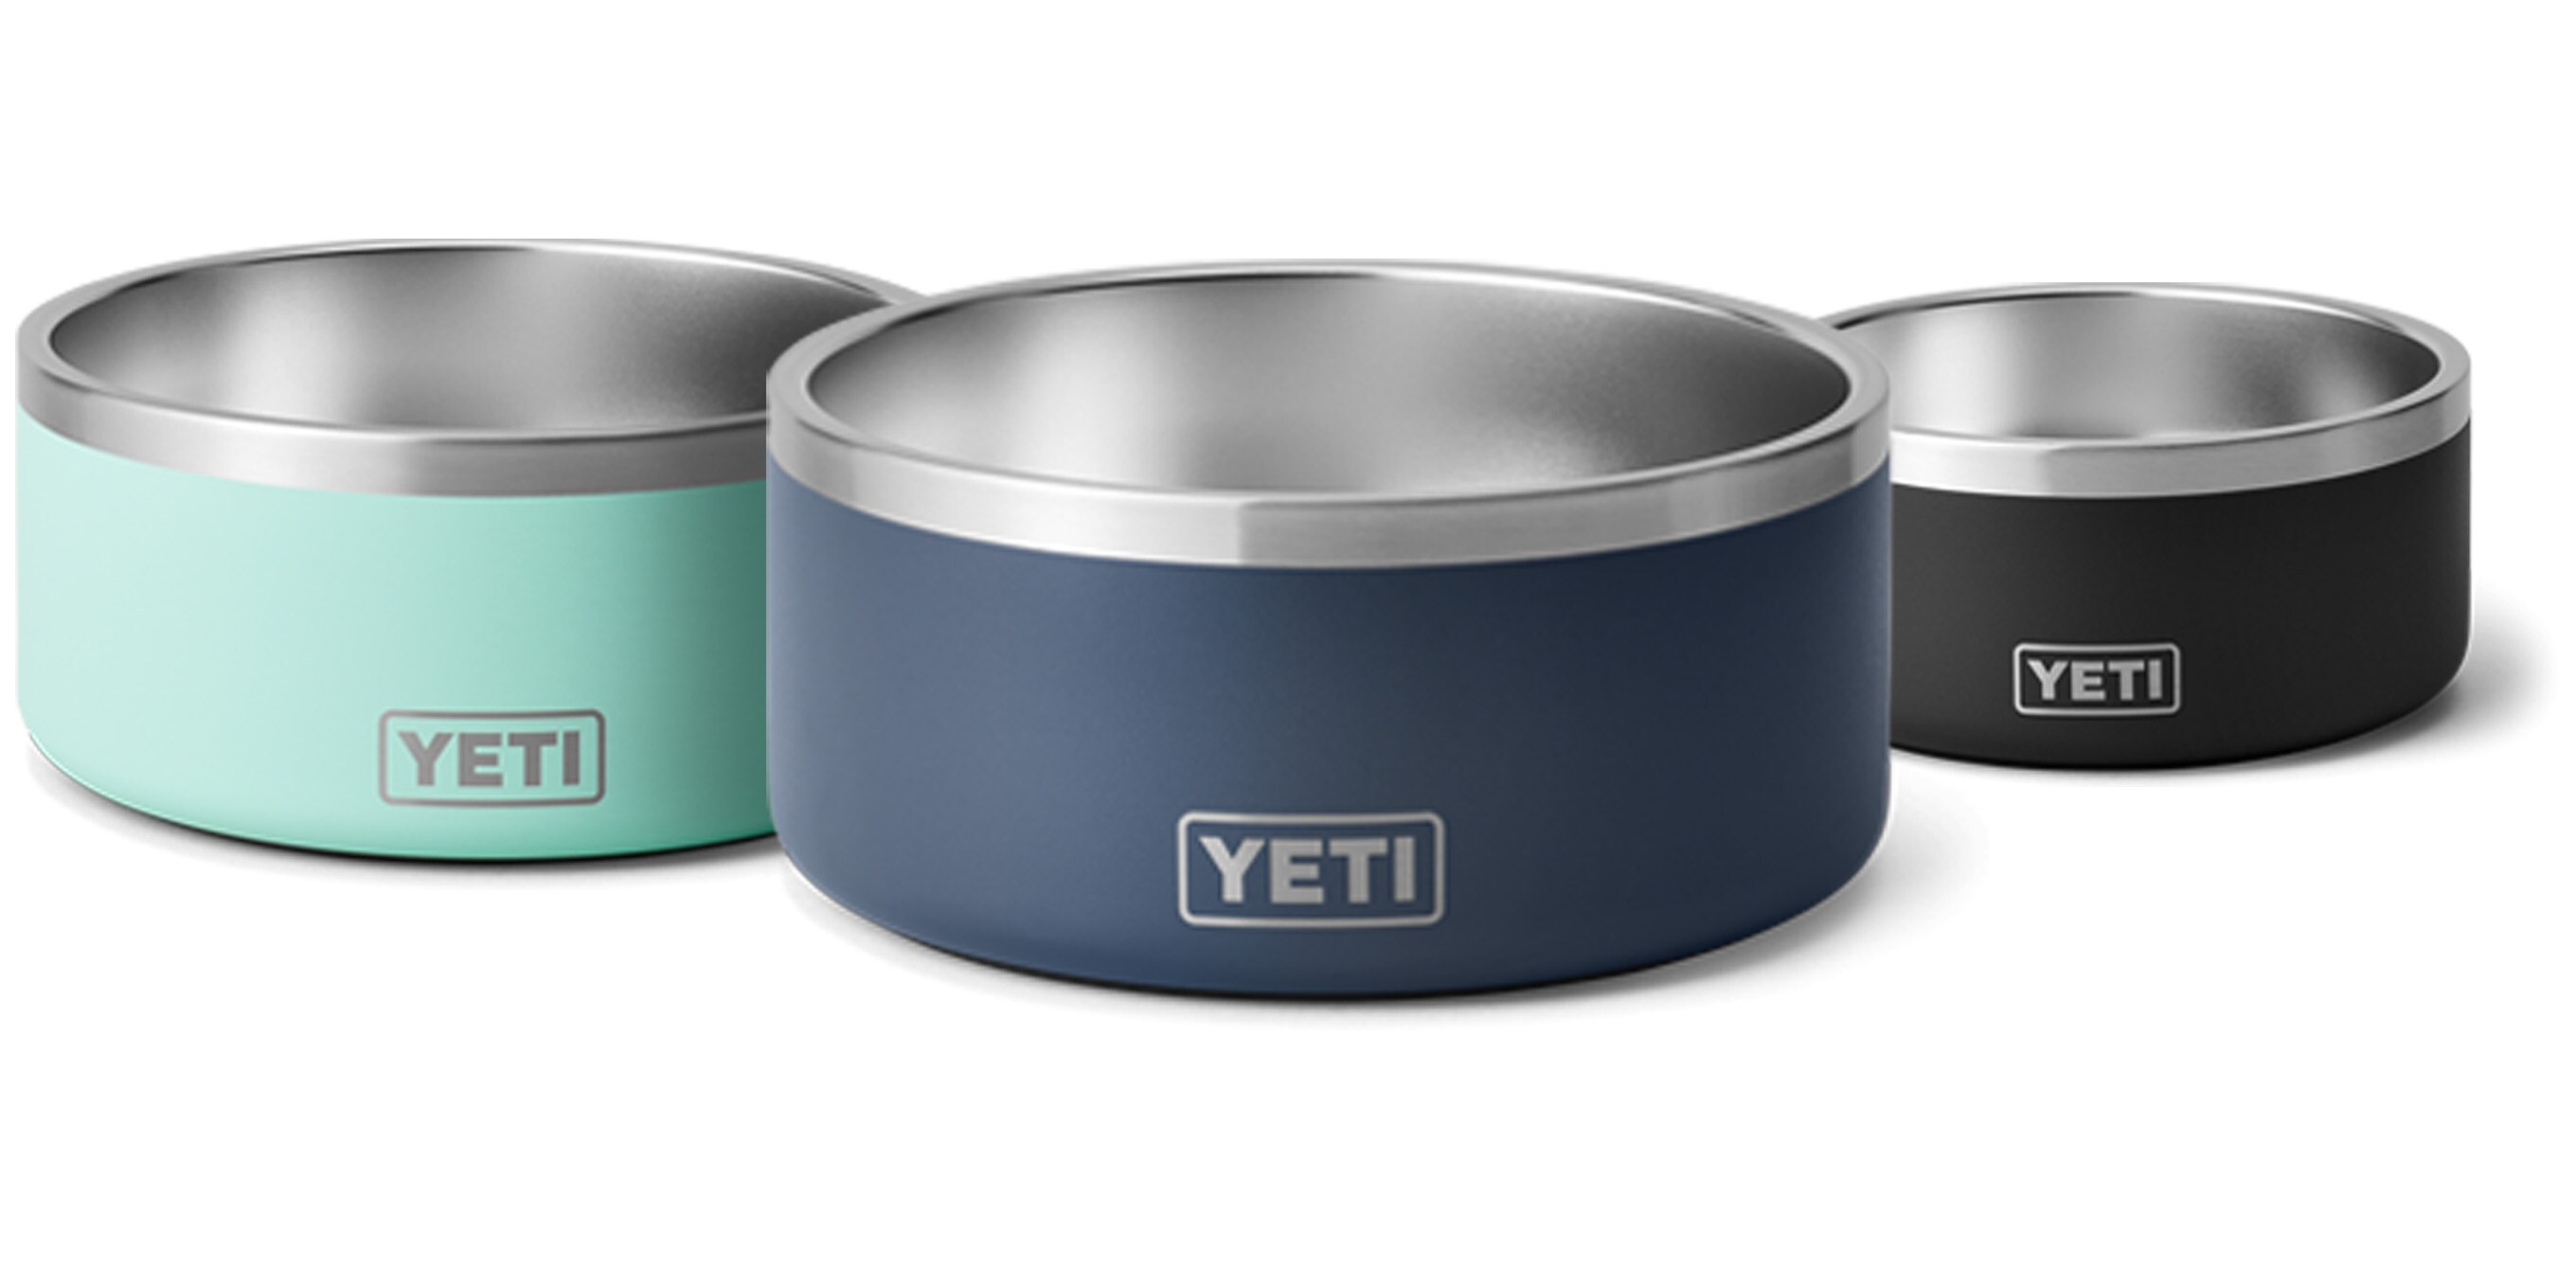 YETI Boomer Dog Bowl, Stainless Steel, 4-cup - Chewy.com